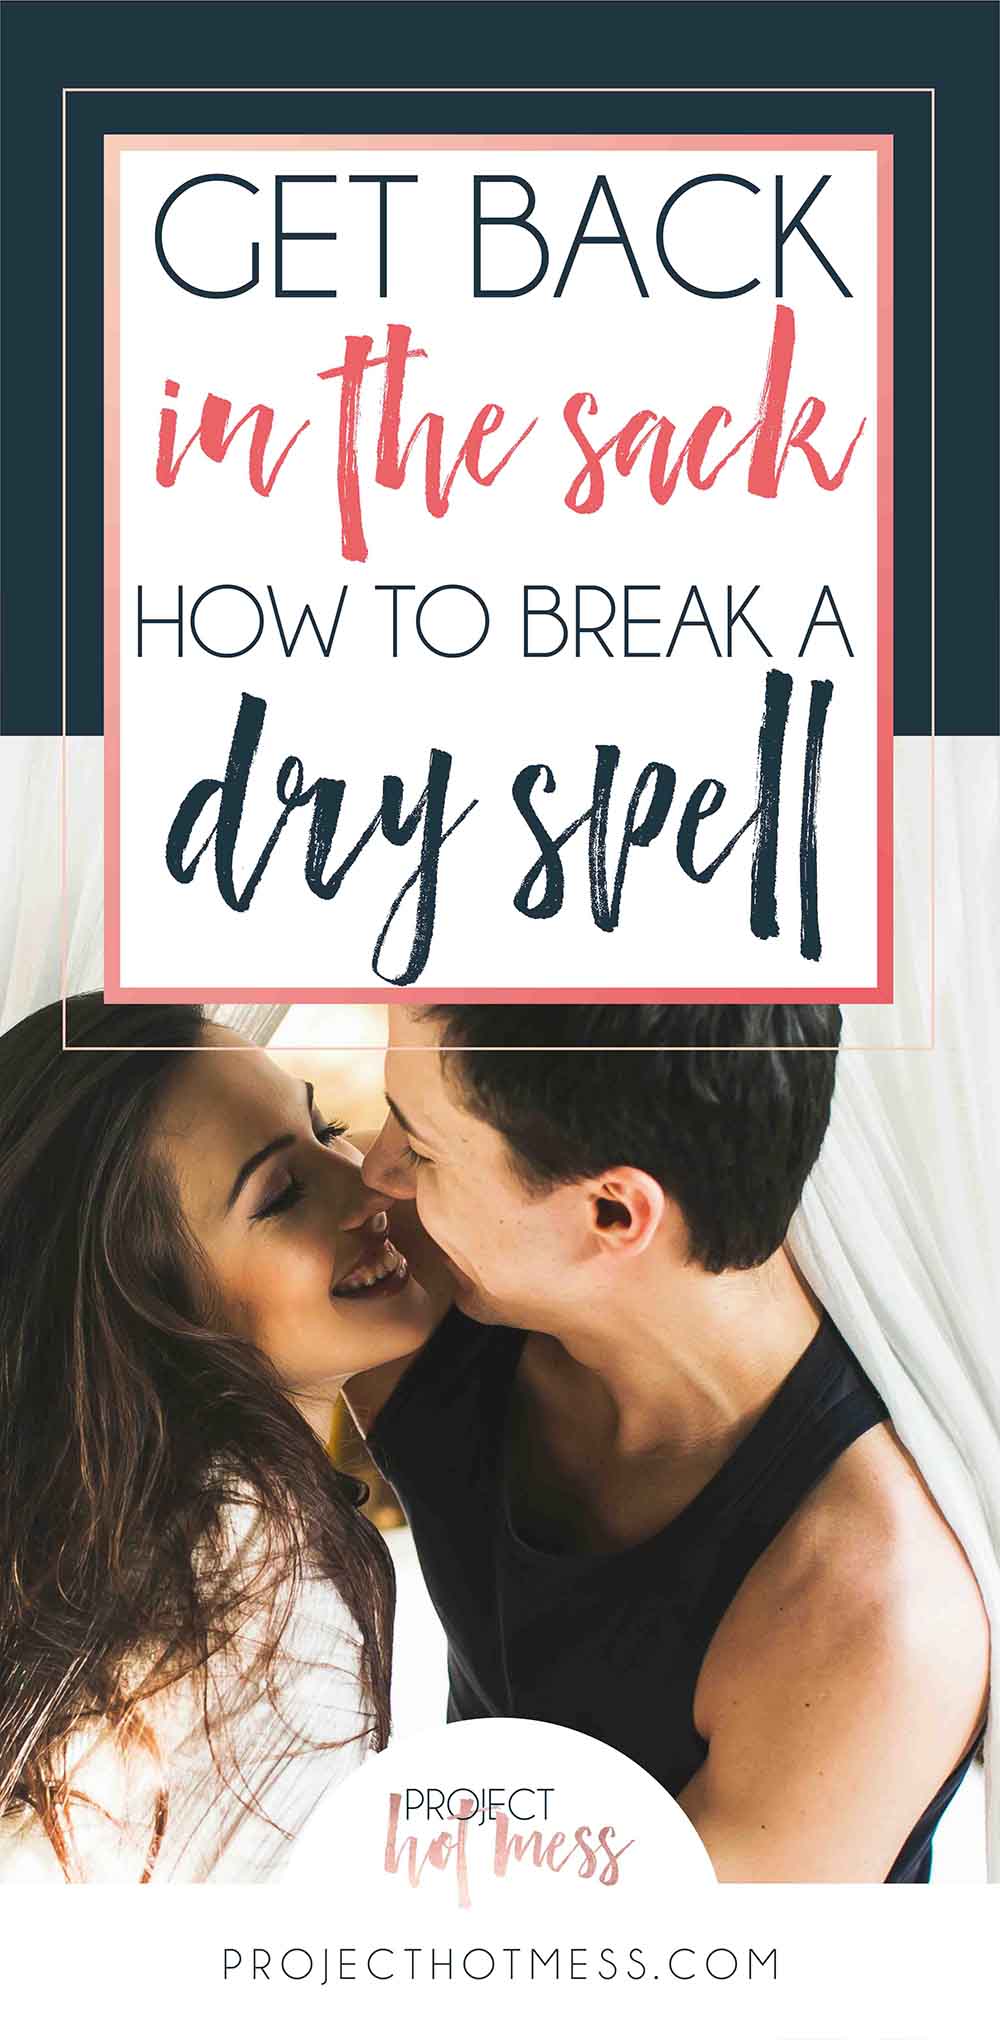 There are a lot of things that can trigger off a dry spell in a relationship, having a baby is definitely one of them. Here's how you can get back into it!